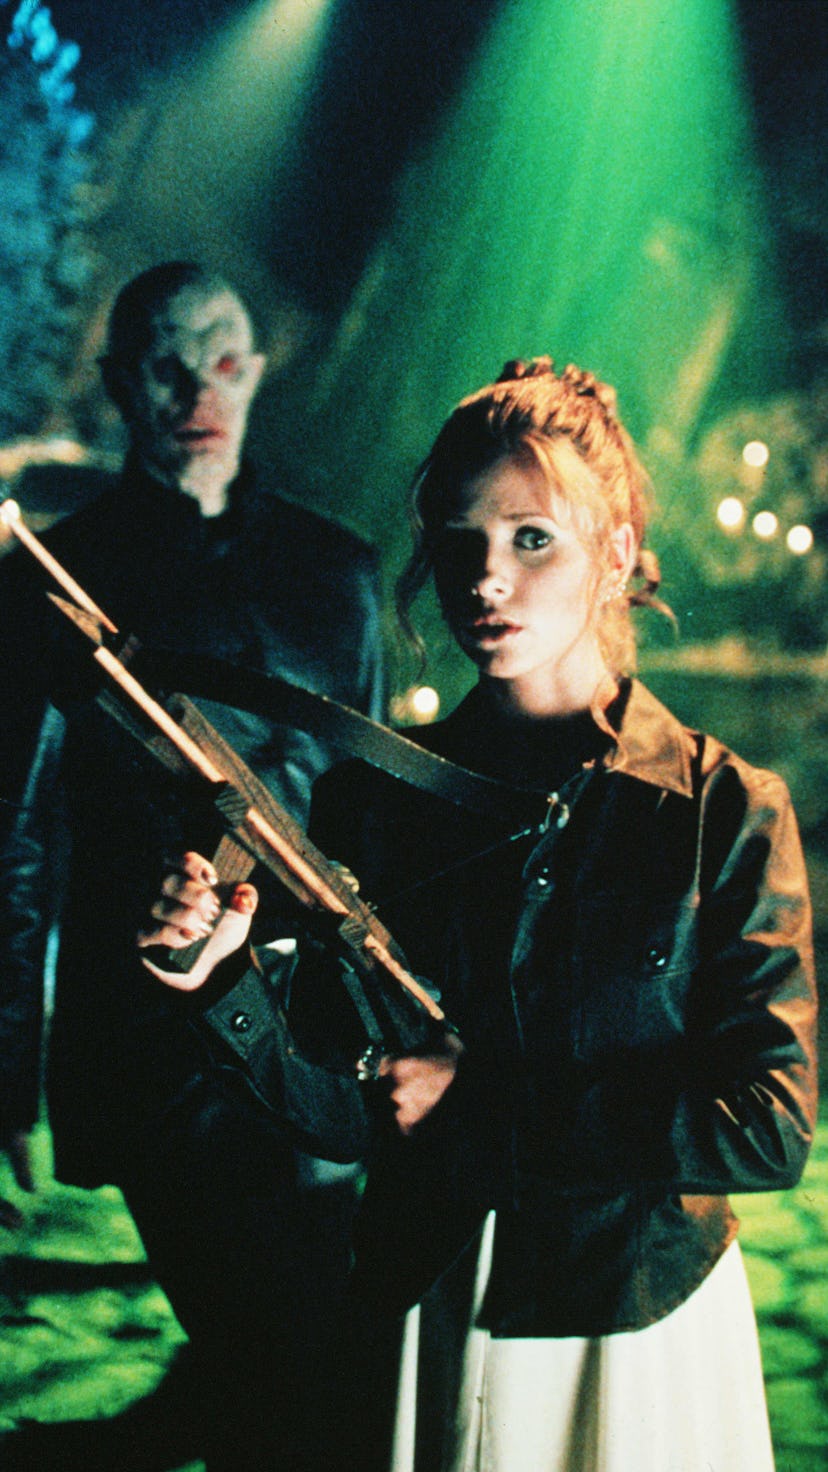 Sarah Michelle Gellar as Buffy The Vampire Slayer holding a crossbow in a scene and a vampire behind...